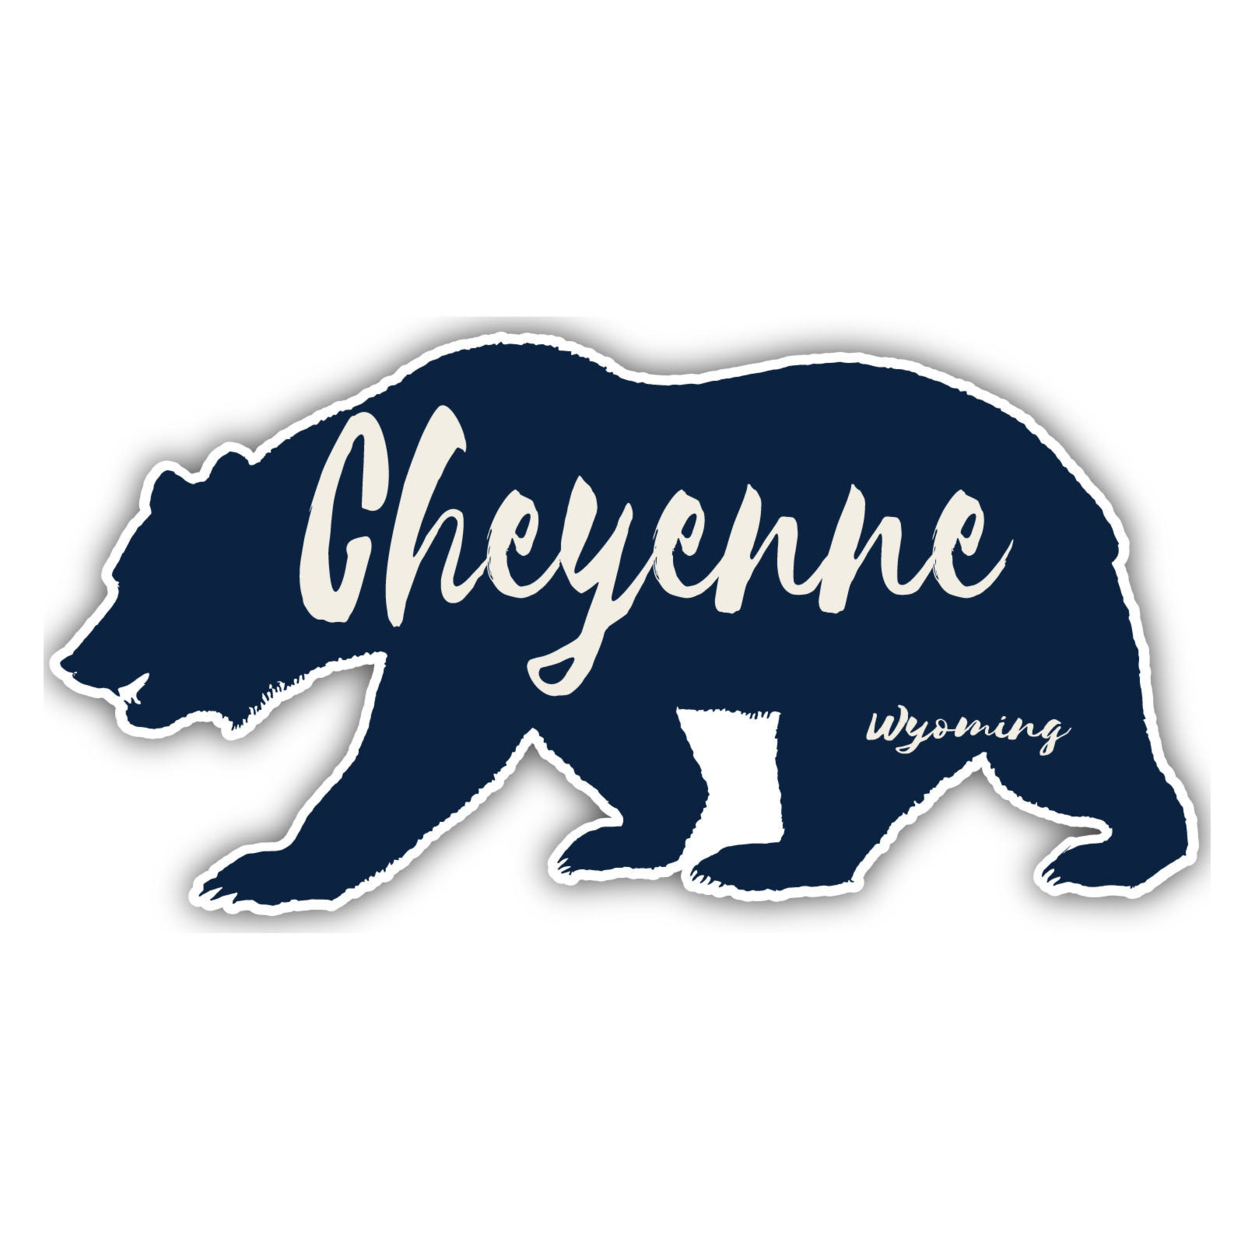 Cheyenne Wyoming Souvenir Decorative Stickers (Choose Theme And Size) - 4-Pack, 10-Inch, Bear